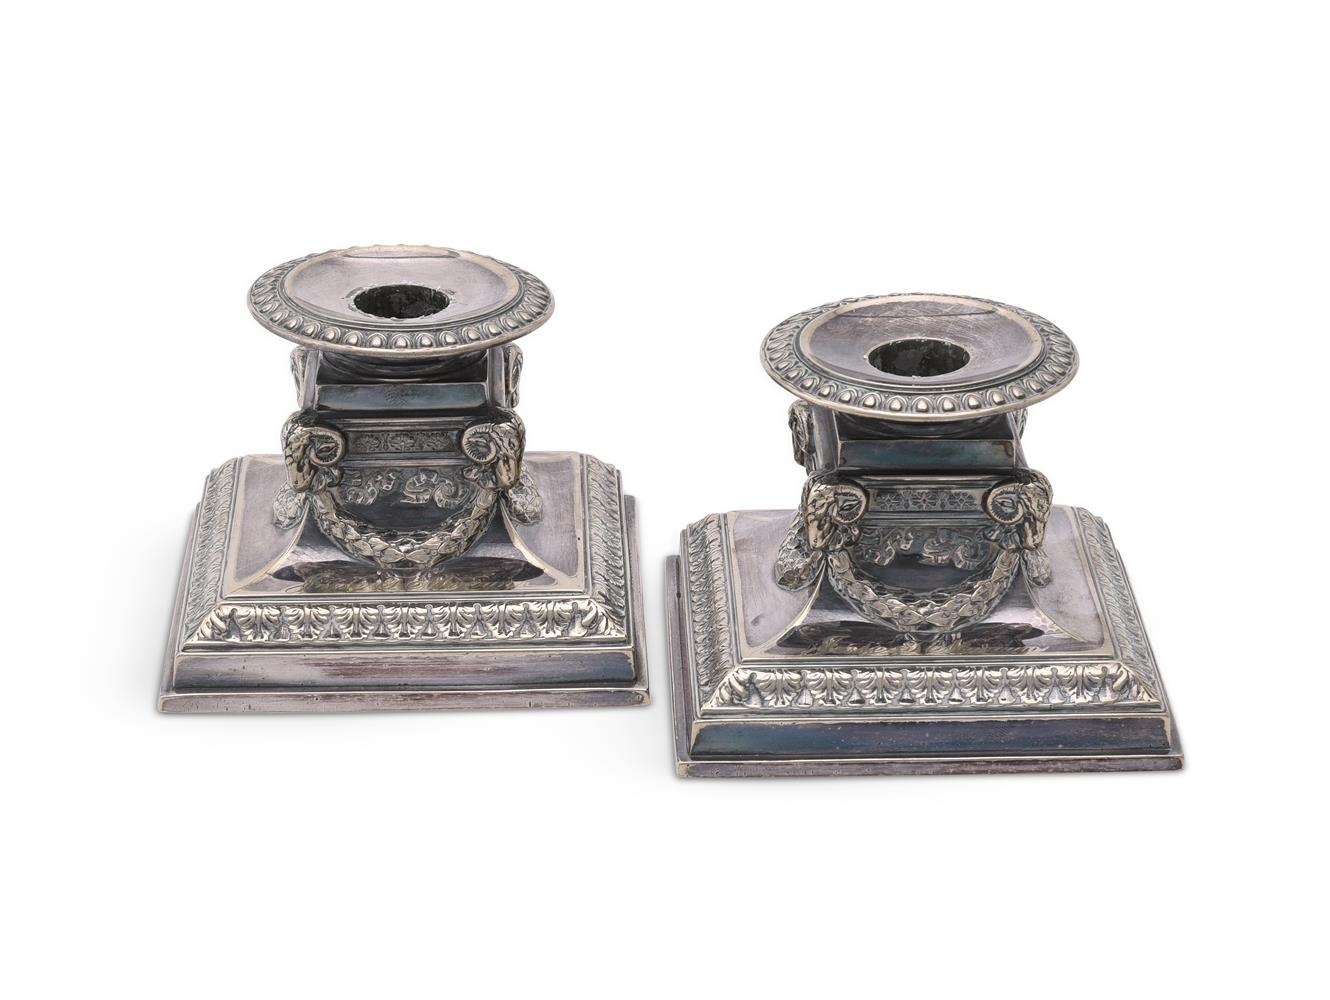 A PAIR OF AMERICAN SILVER SOLDERED CANDLESTICKS